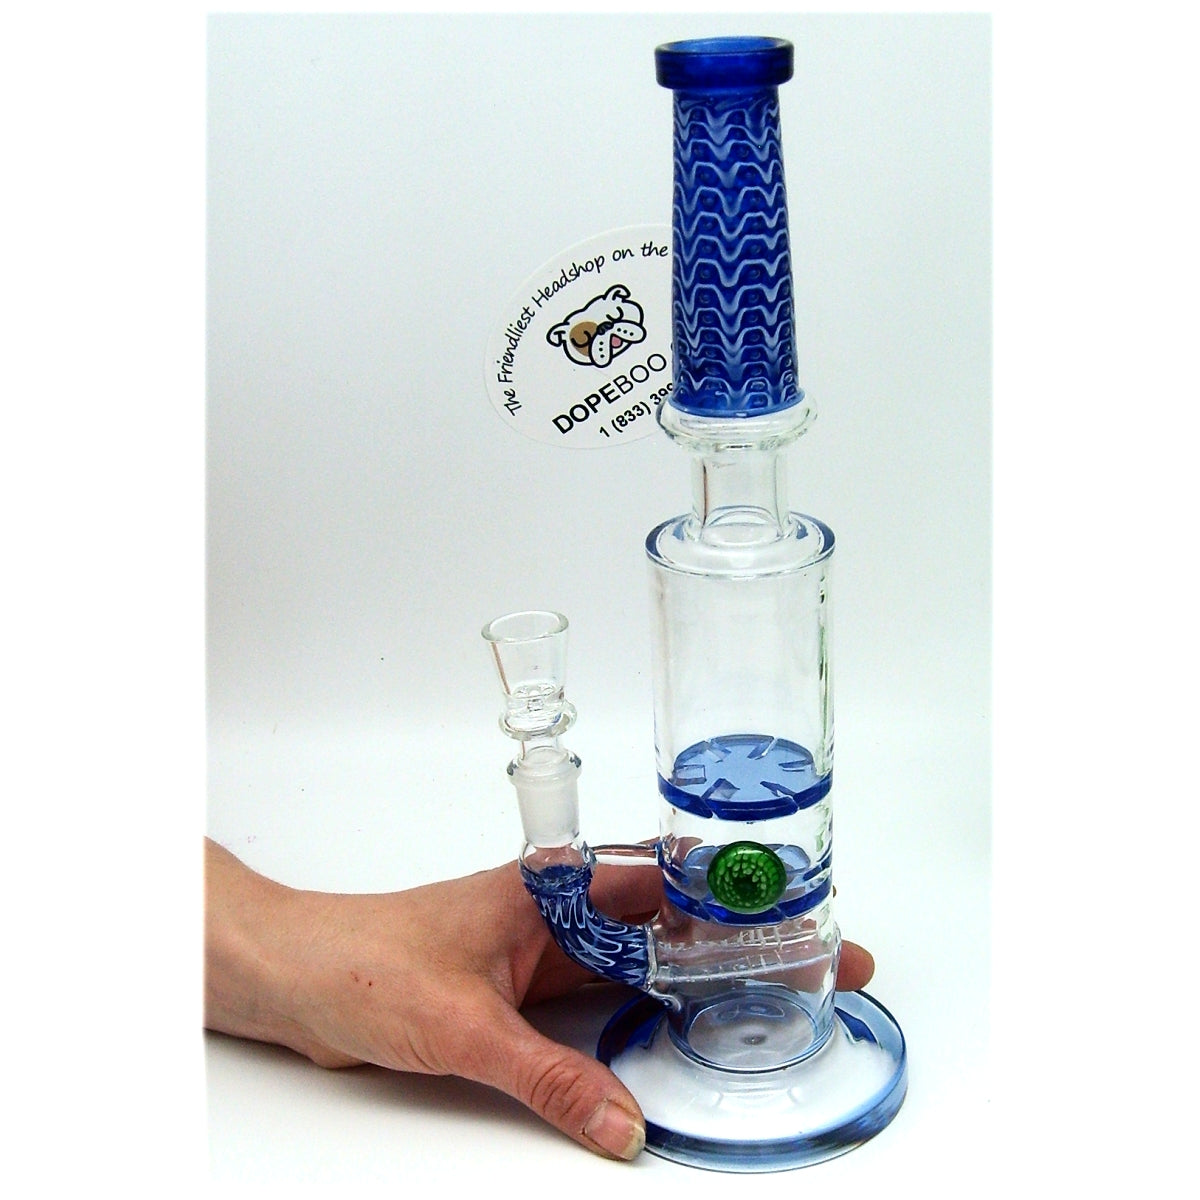 14 Inch Heady Glass Bong with Triple Percs